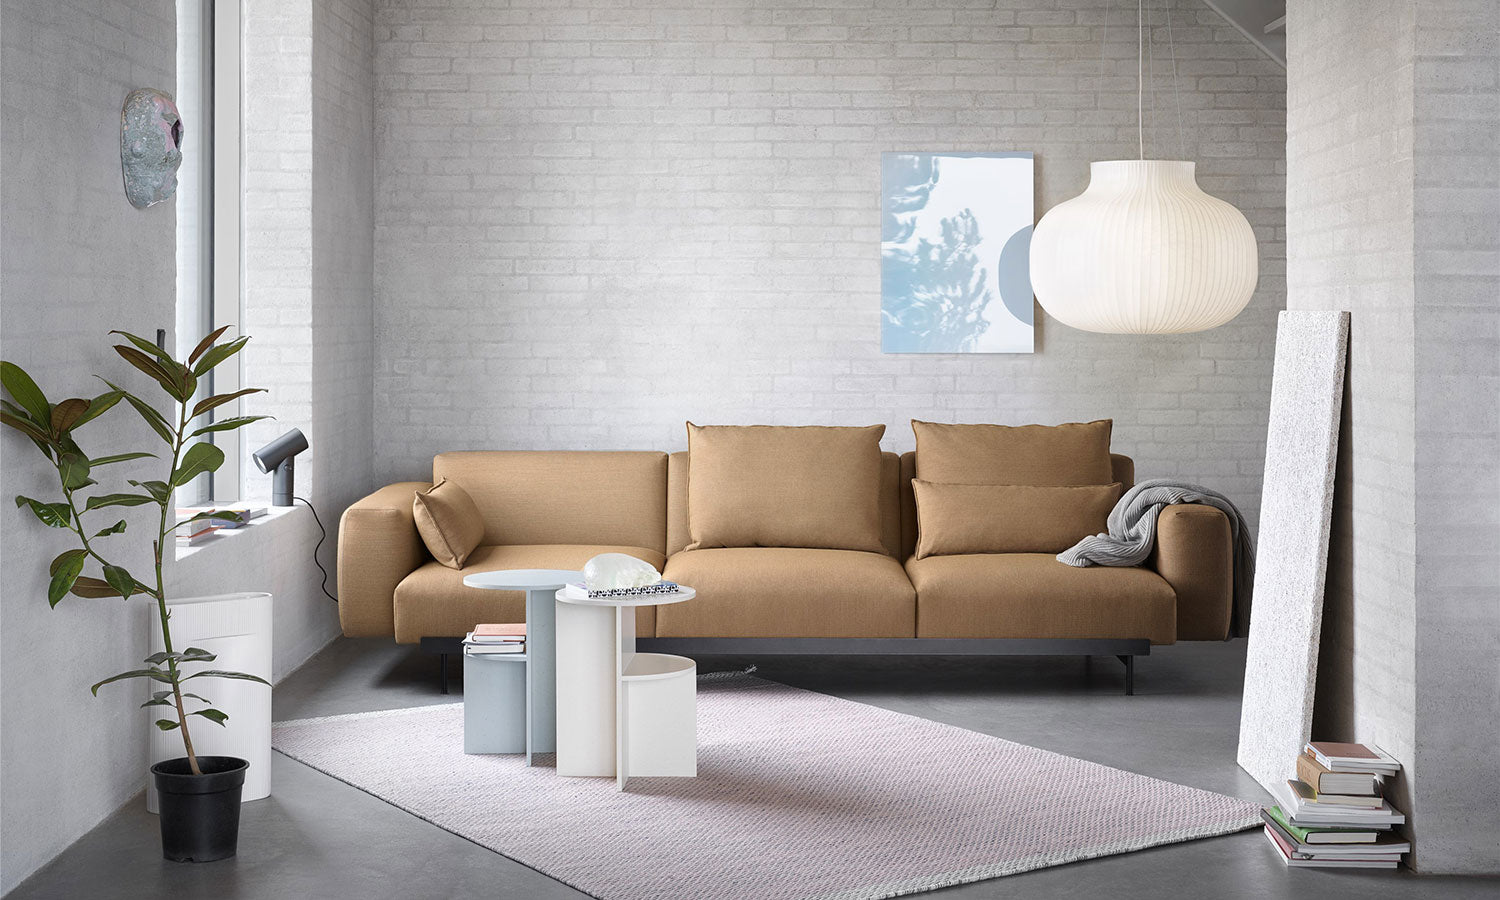 In-situ-3-seater-conf-1-fiord-451-ply-rose-halves-sage-green-beige-strand-muuto-org_1500x900.jpg__PID:9e9dfbdc-4abc-4d06-814b-50c4b3113bed